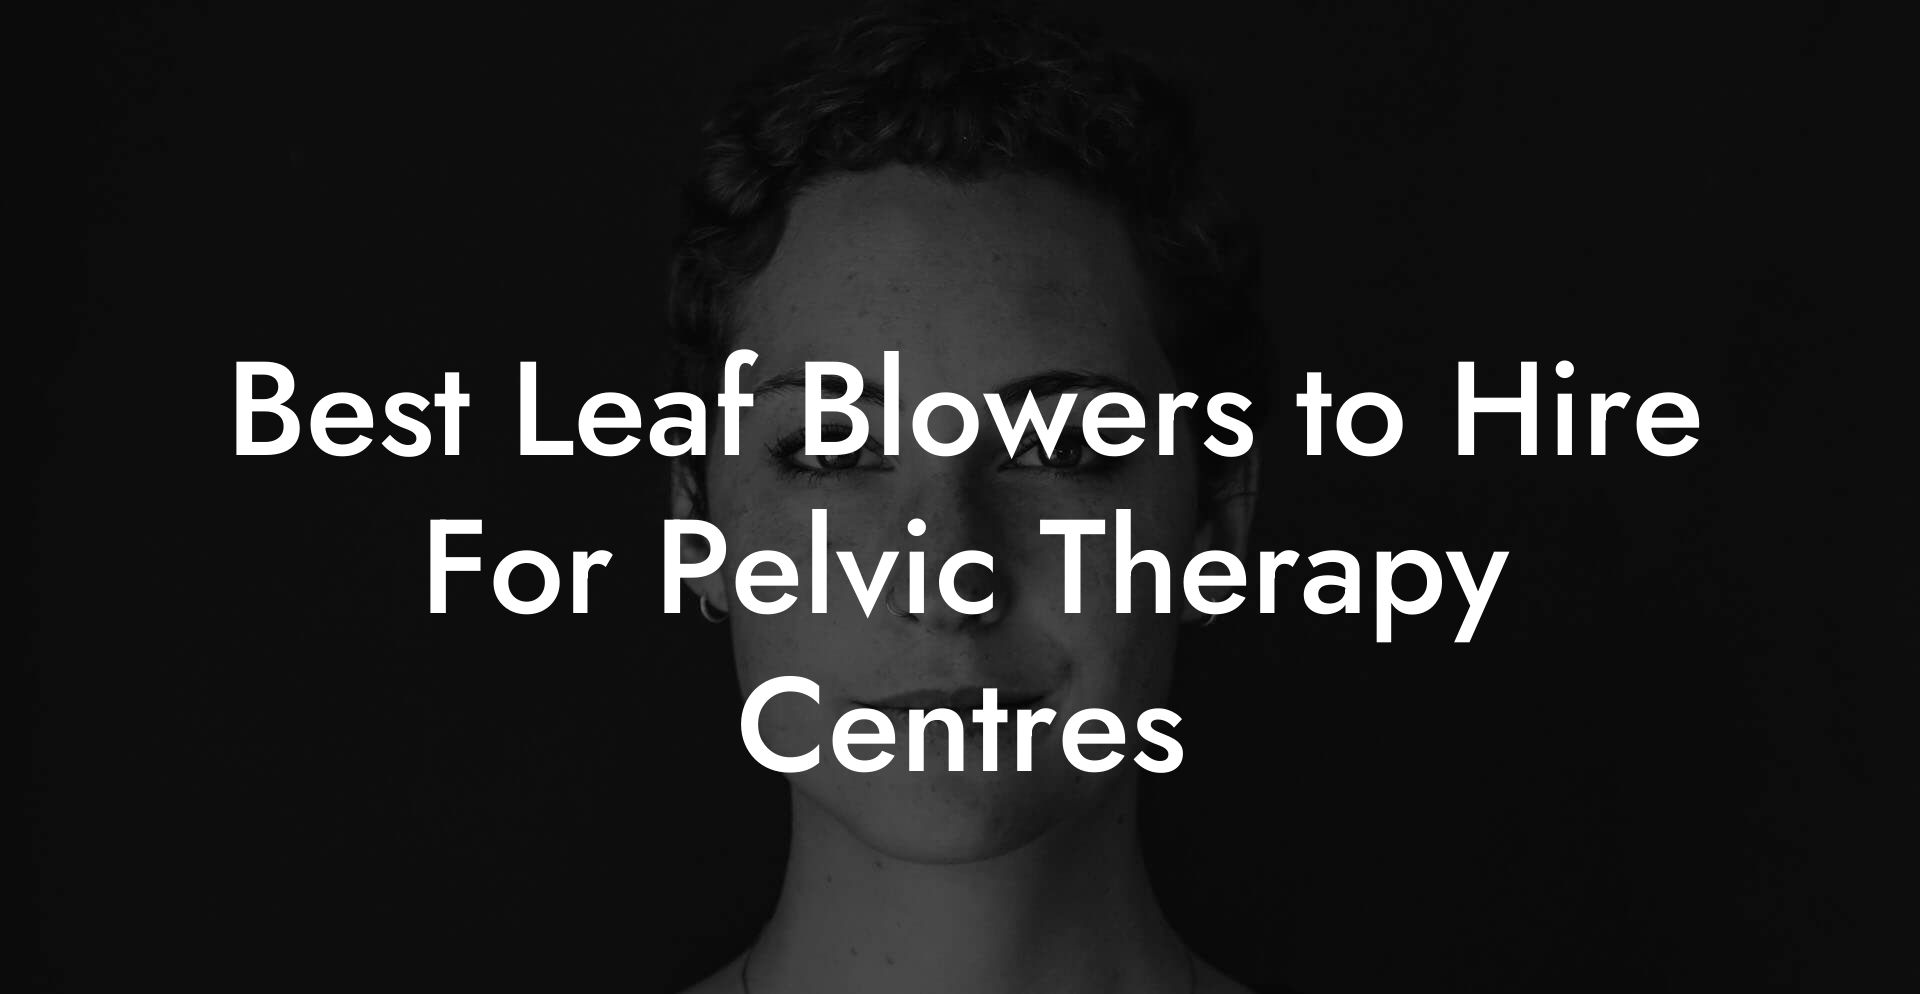 Best Leaf Blowers to Hire For Pelvic Therapy Centres